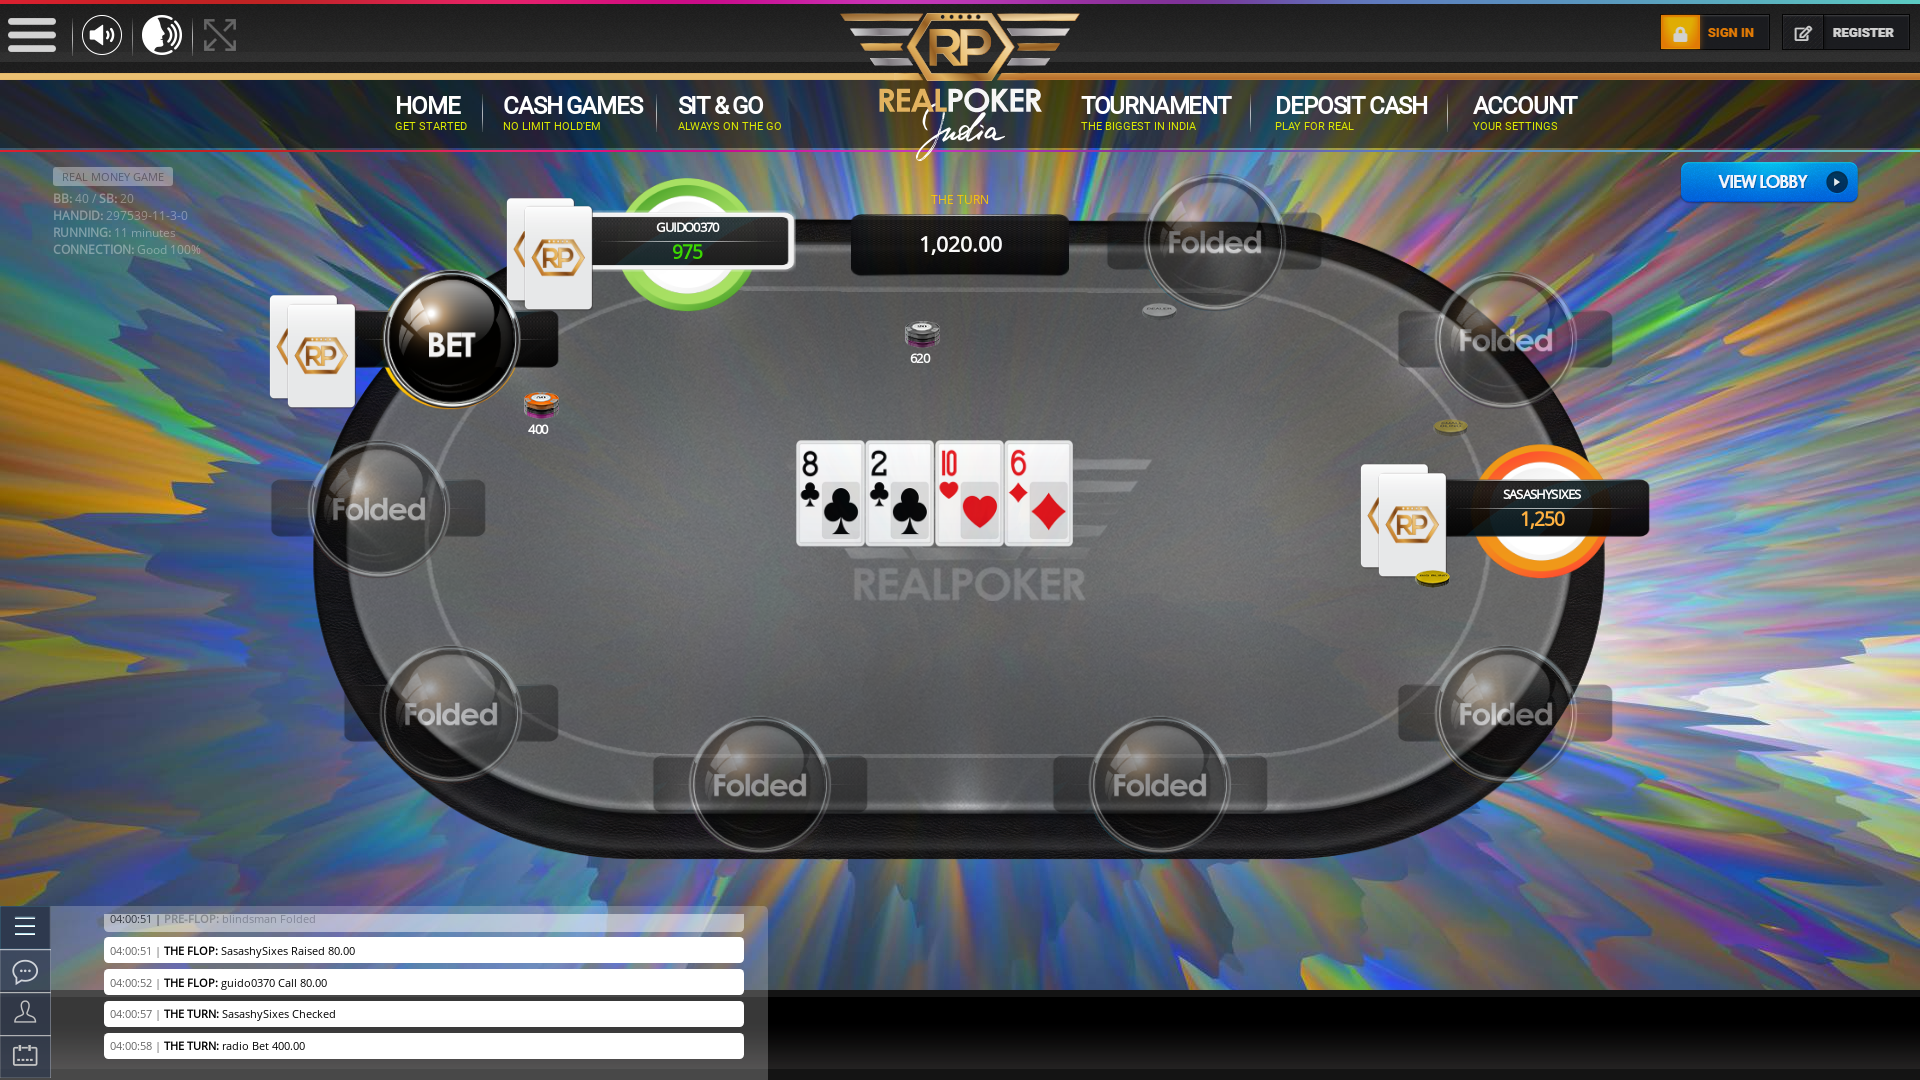 BTM Layout, Bangalore real poker on a 10 player table in the 11th minute of the game